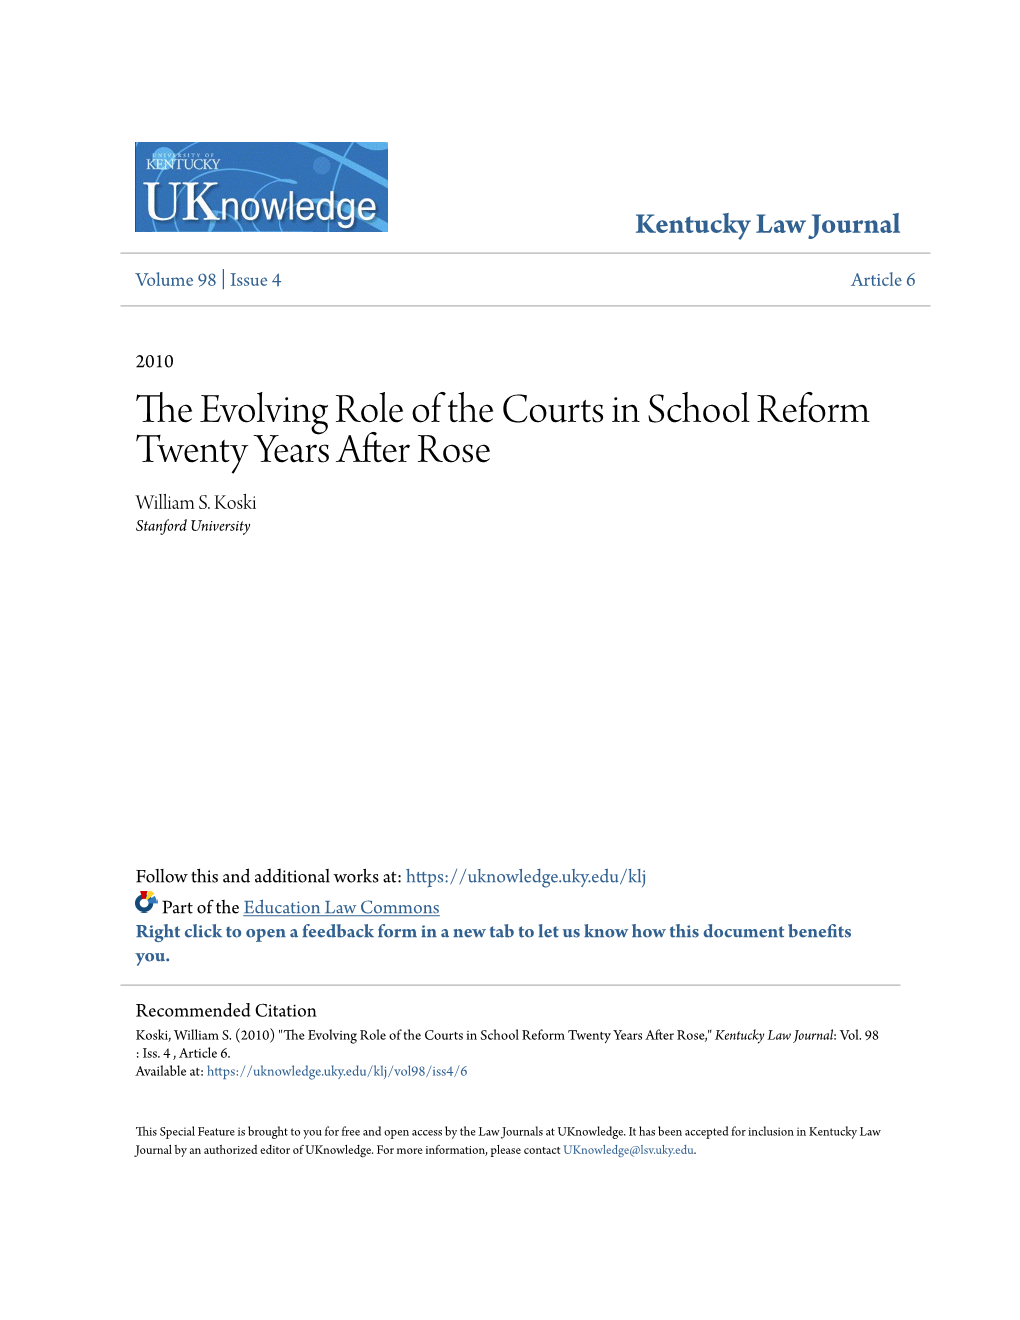 The Evolving Role of the Courts in School Reform Twenty Years After Rose